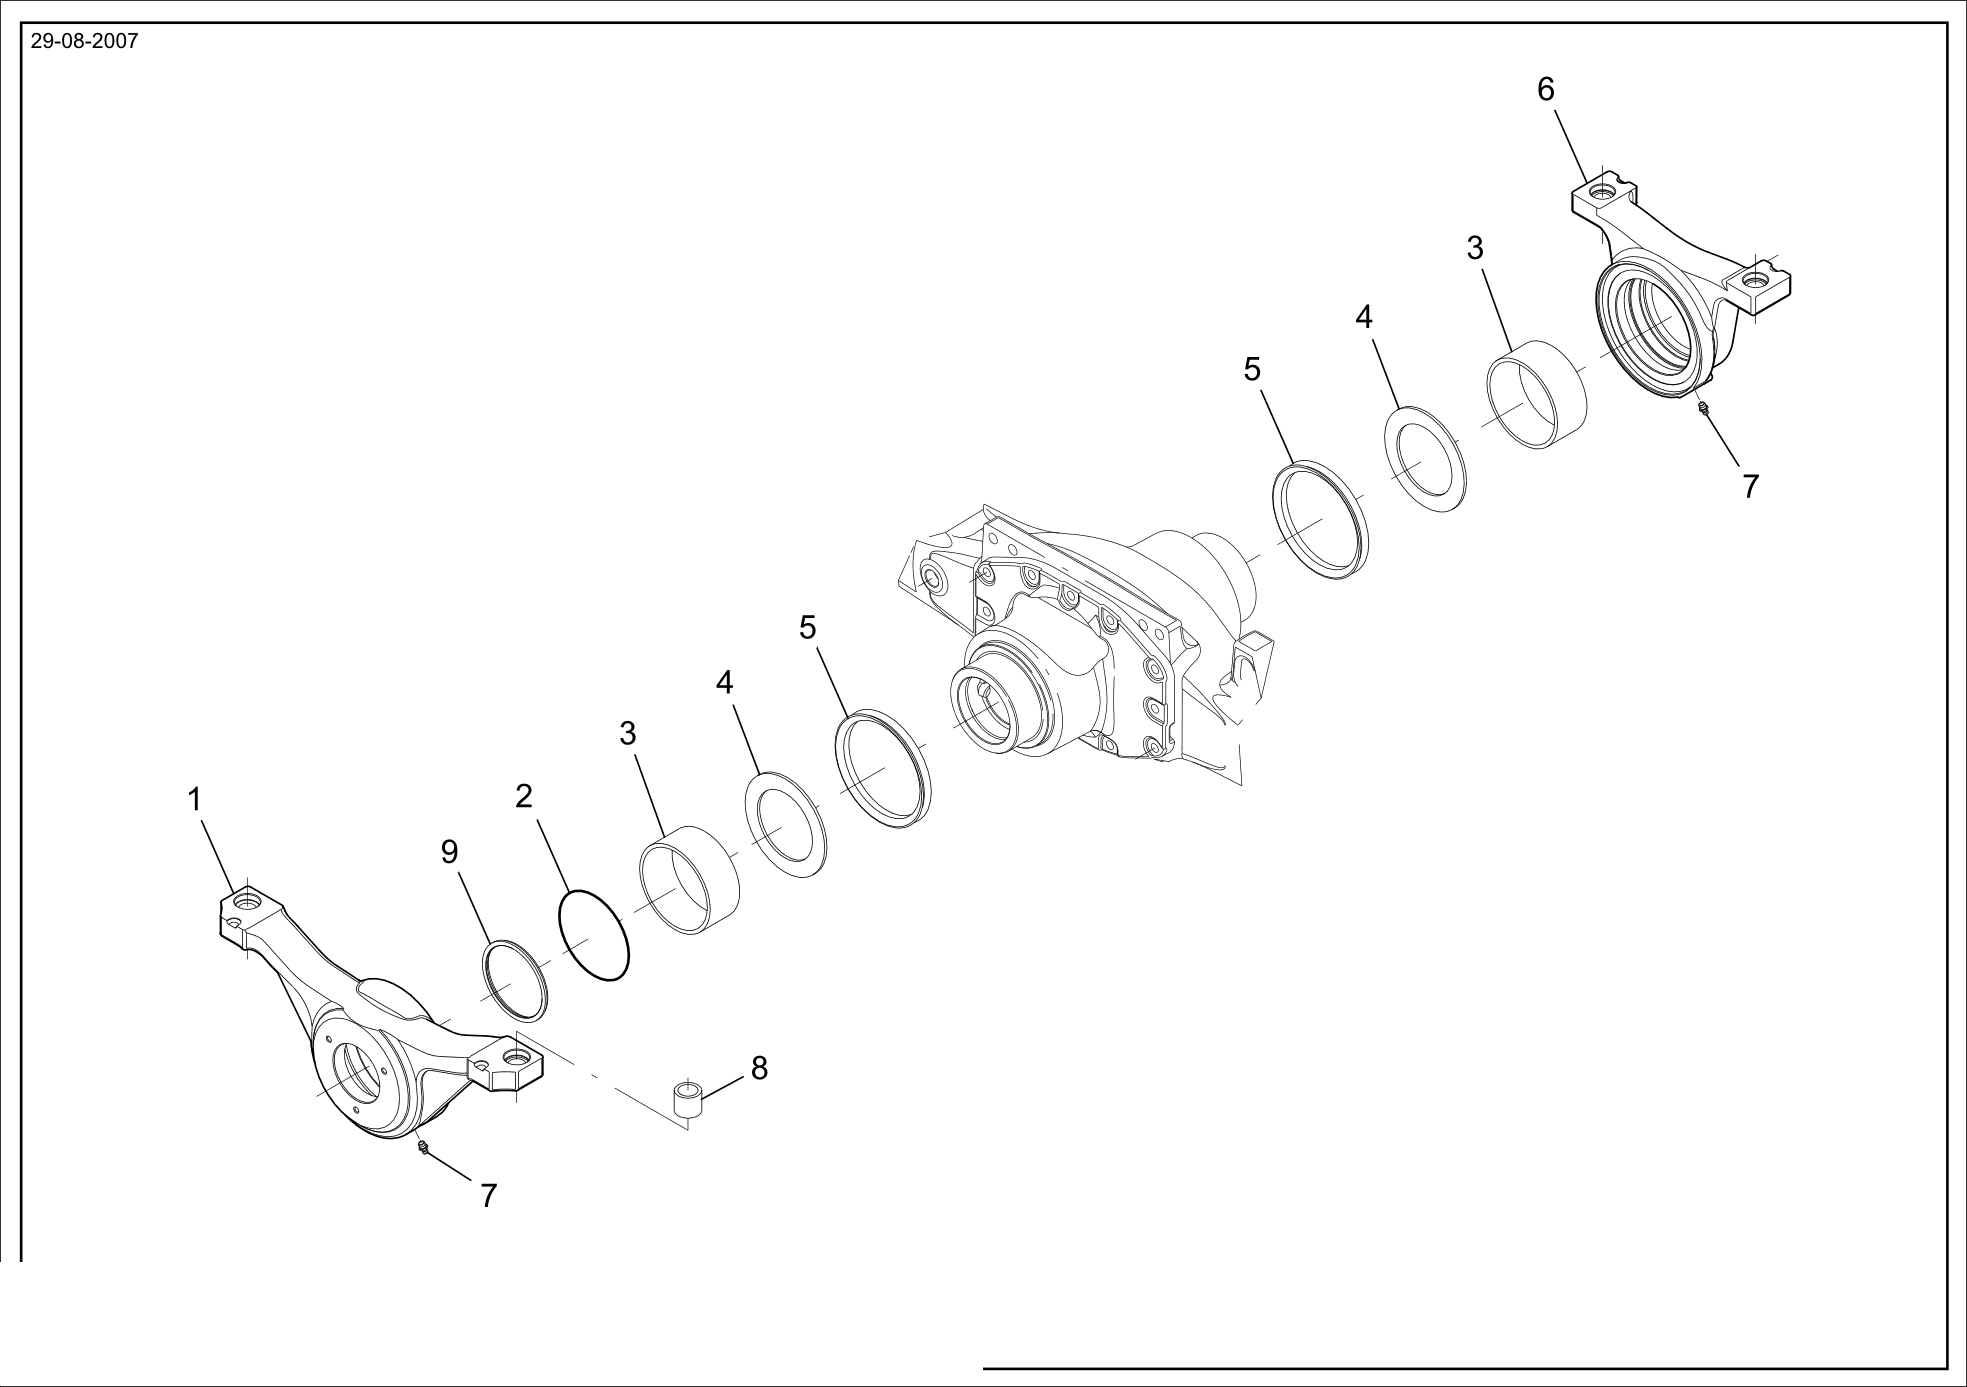 drawing for ERKUNT Y01481 - SUPPORT (figure 2)